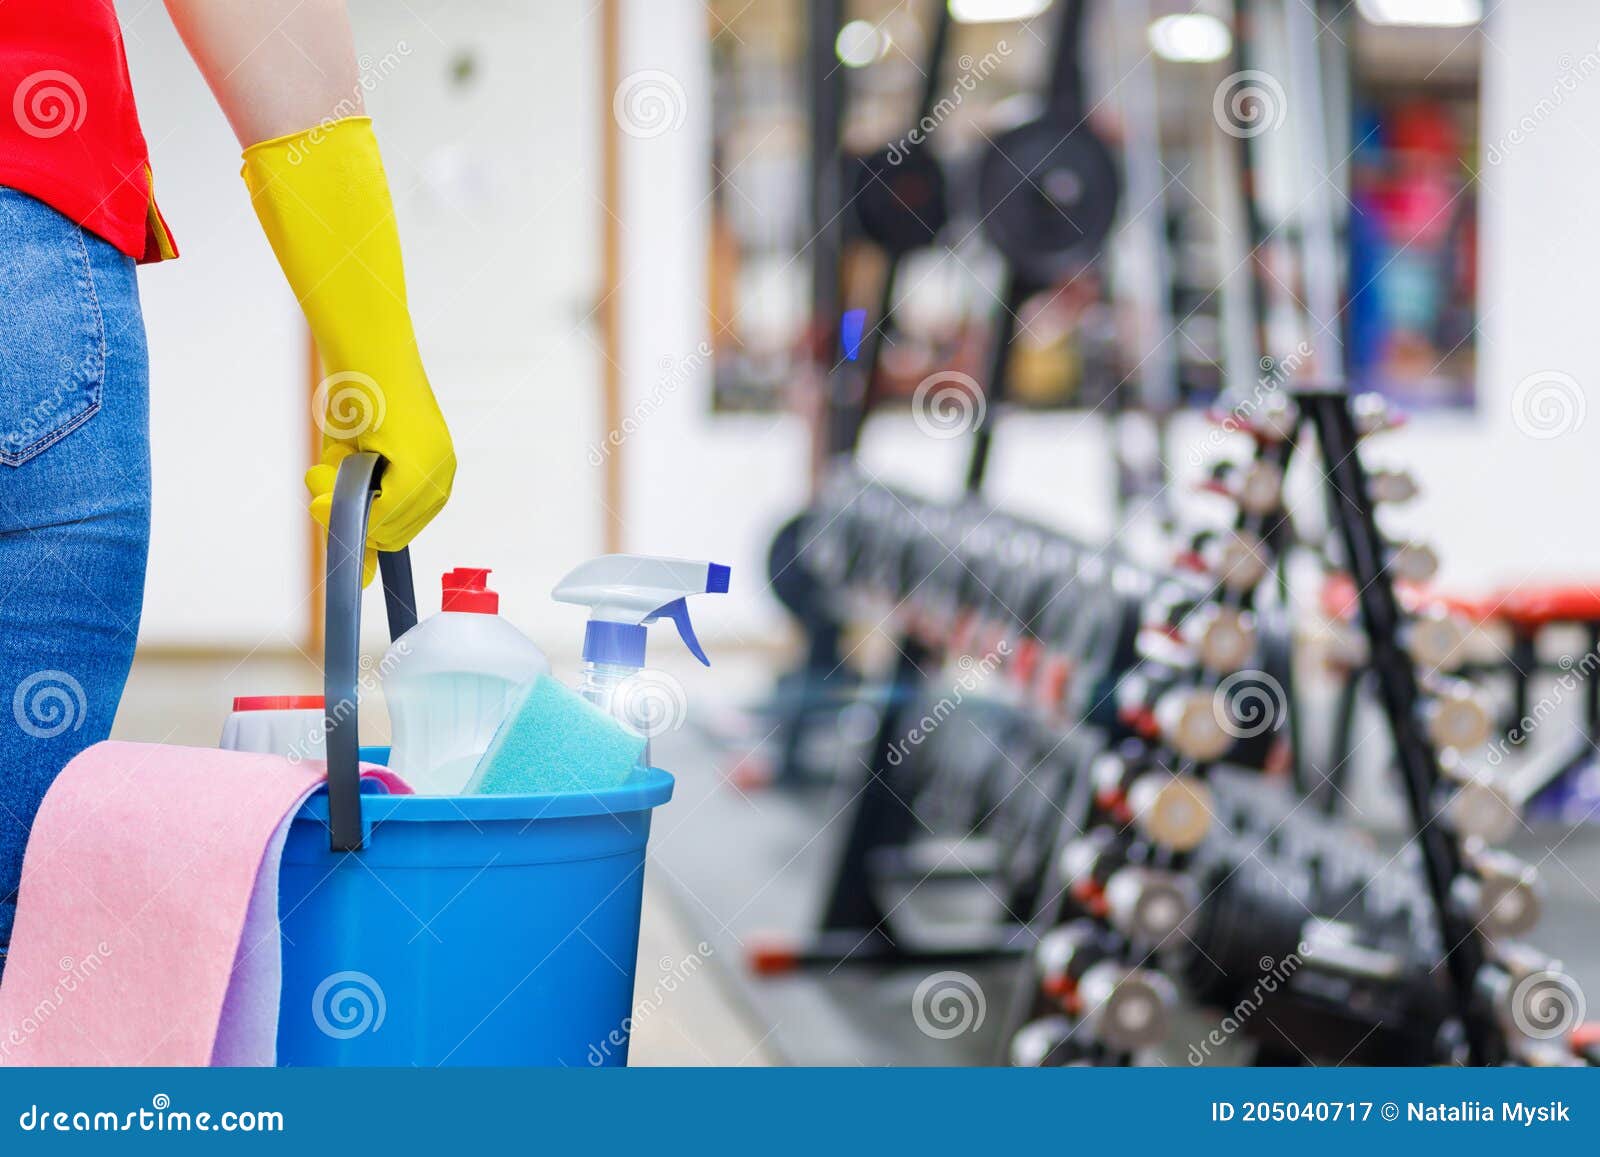 gym cleaning concept